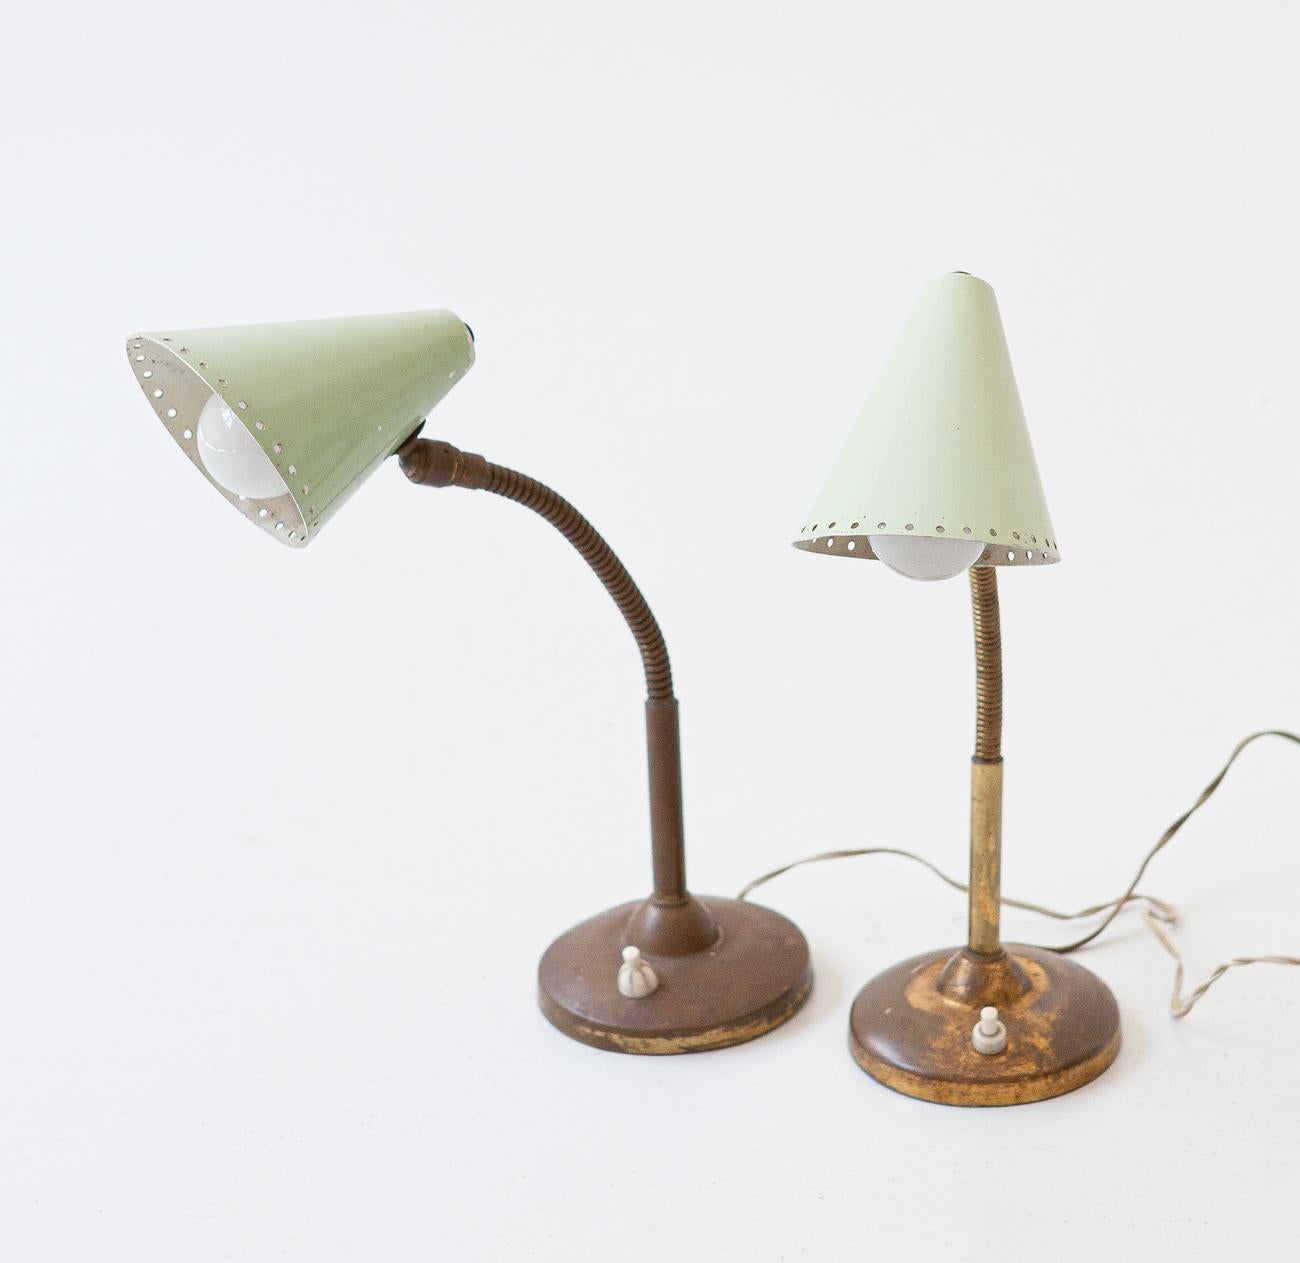 Pair of vintage table or desk lamps manufactured in Italy during the 1950s

Original working wire with standard E14 bulbs.